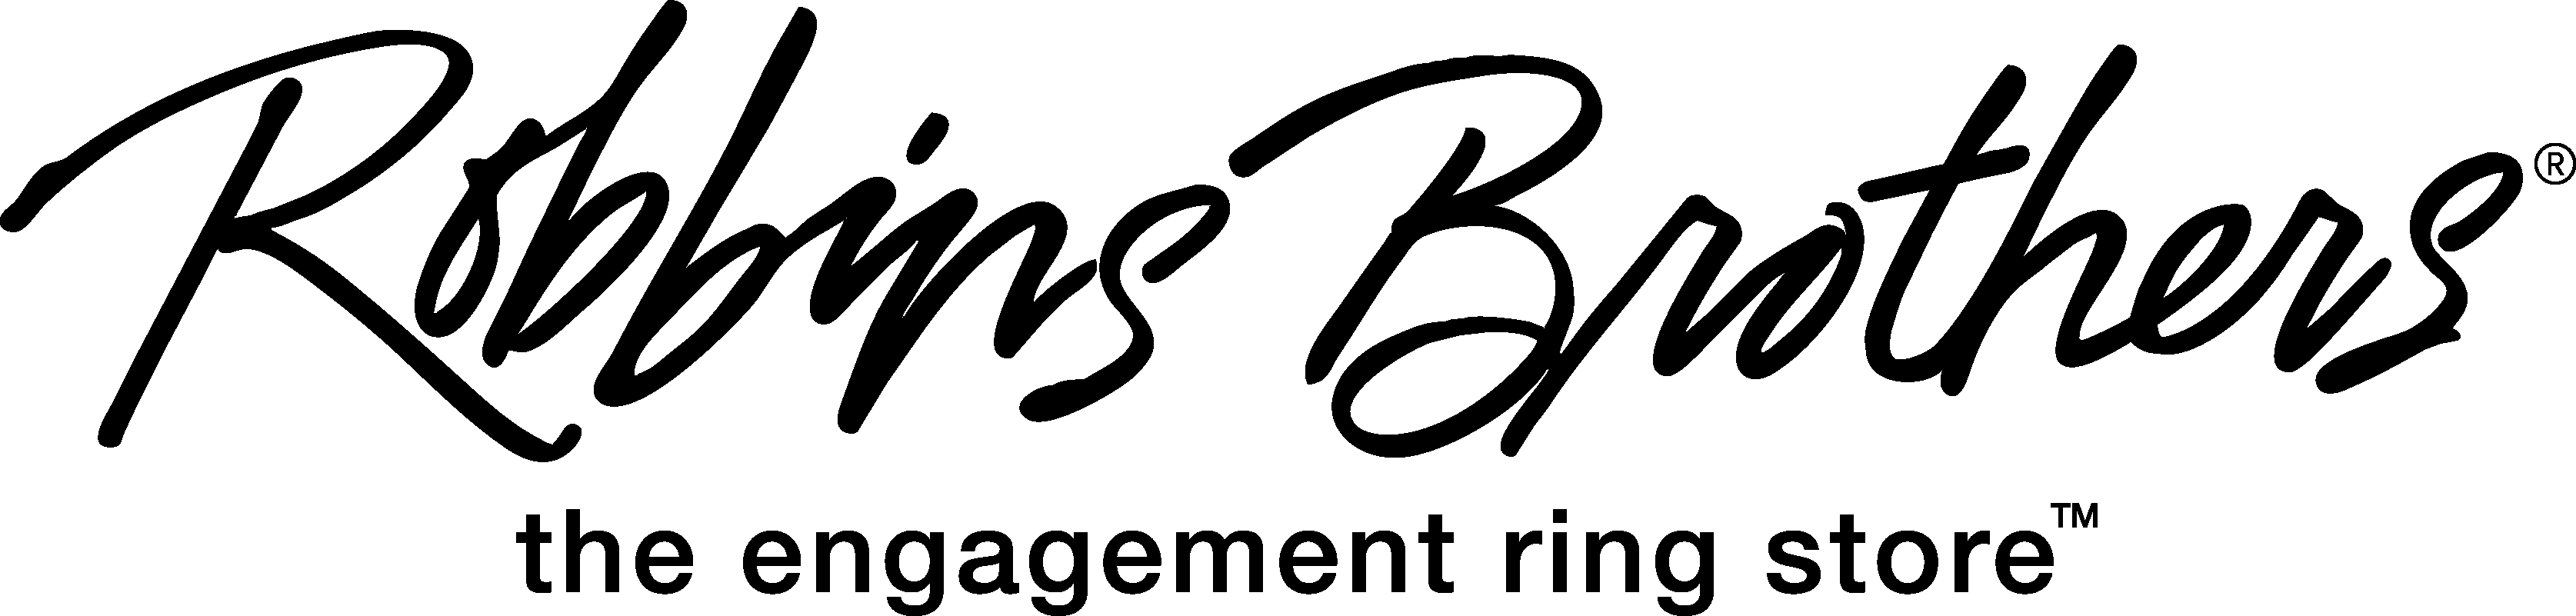 Robbins Brothers, The Engagement Ring Store Company Logo